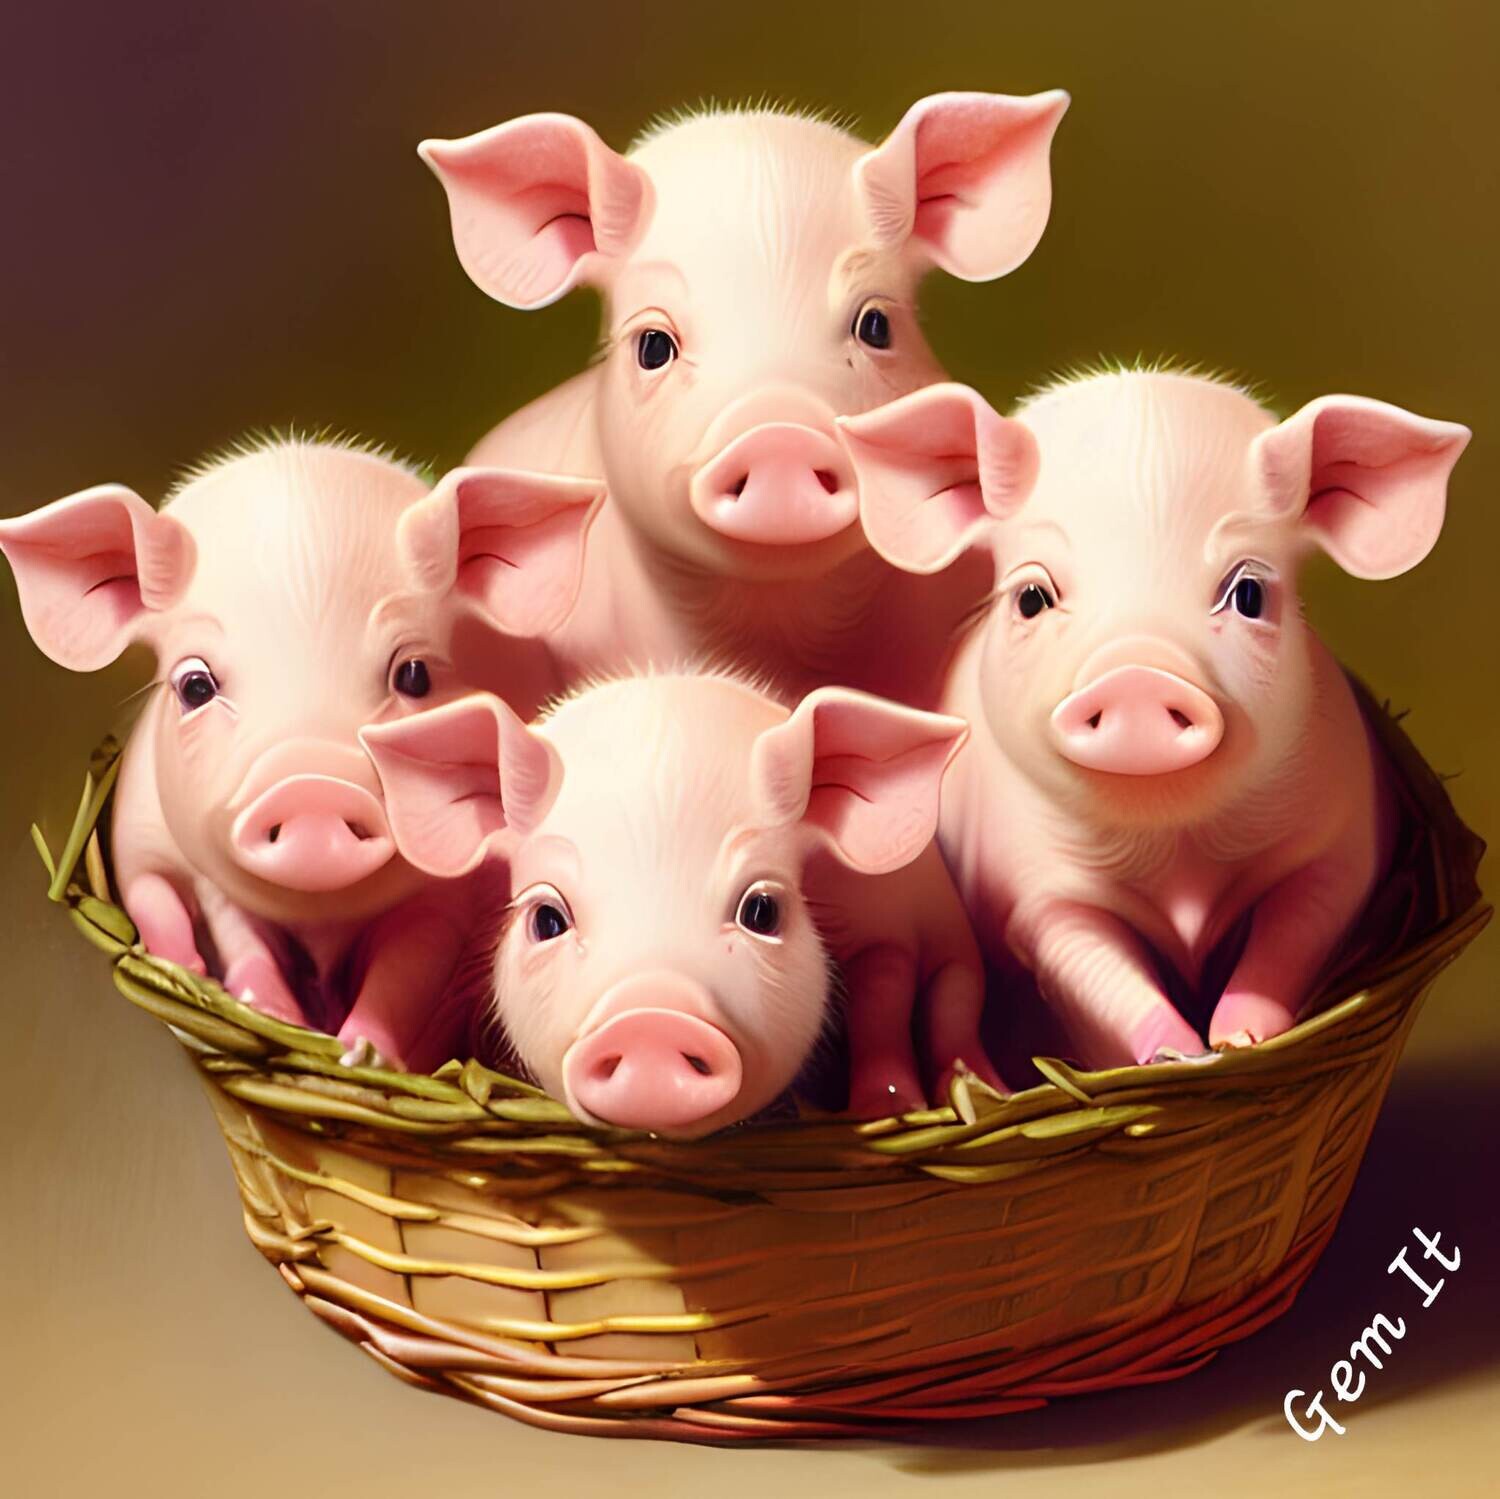 Piglets in a Basket 285 - Full Drill Diamond Painting - Specially ordered for you. Delivery is approximately 4 - 6 weeks.